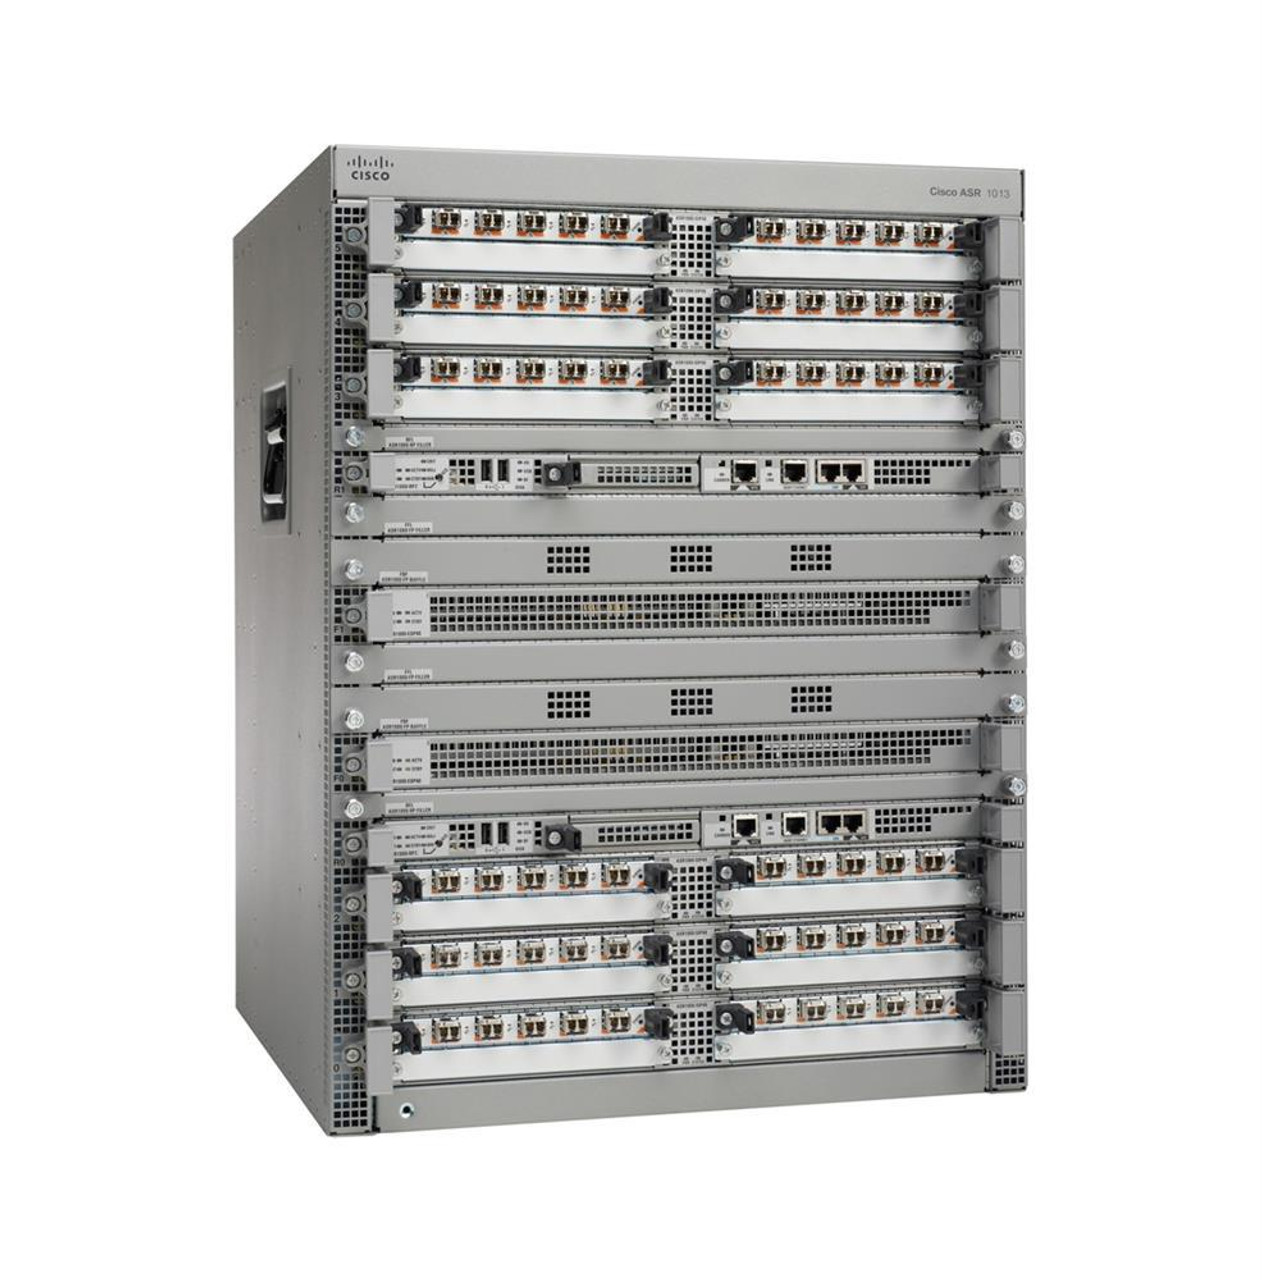 ASR1013 -inchCisco 1013 Aggregation Services Router 28 Slot 24x Shared Port Adapter, 2 x Embedded Service Processor, 2 x Route Processor (Refurbished)